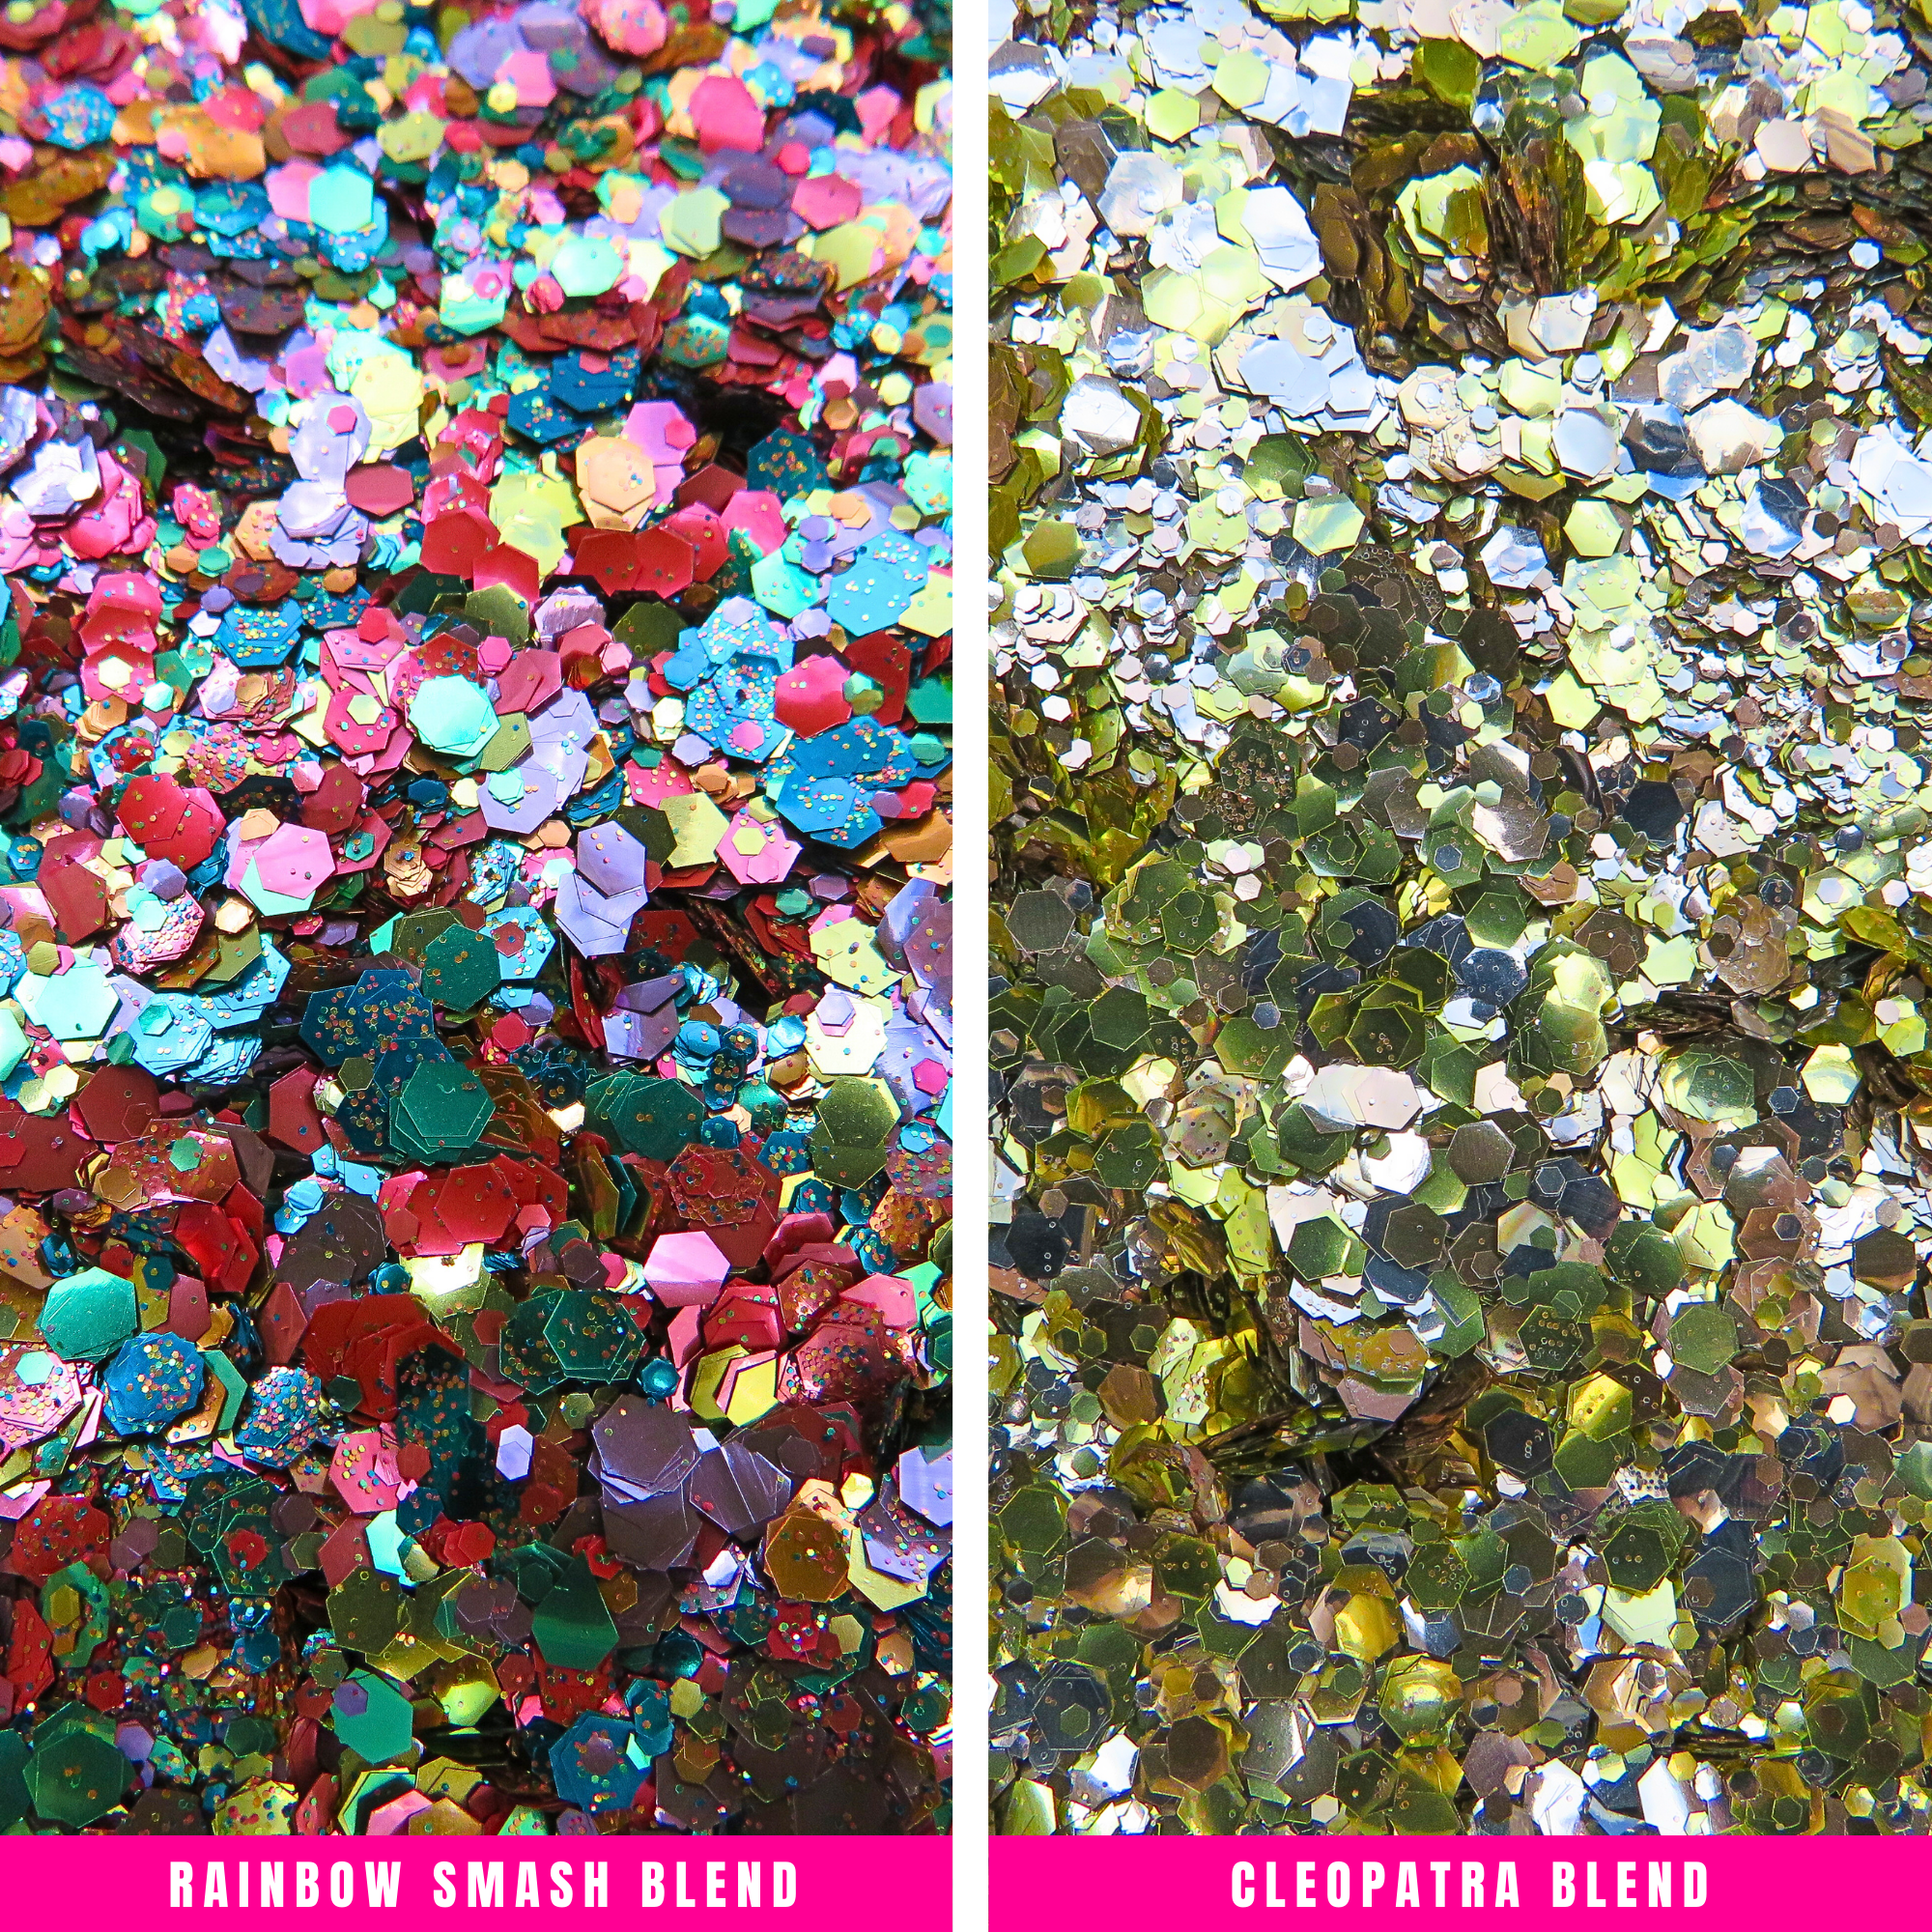 Rainbow smash and Cleopatra blends of biodegradable cosmetic glitter in the eco glitter gift set box by Luminosity Glitter.